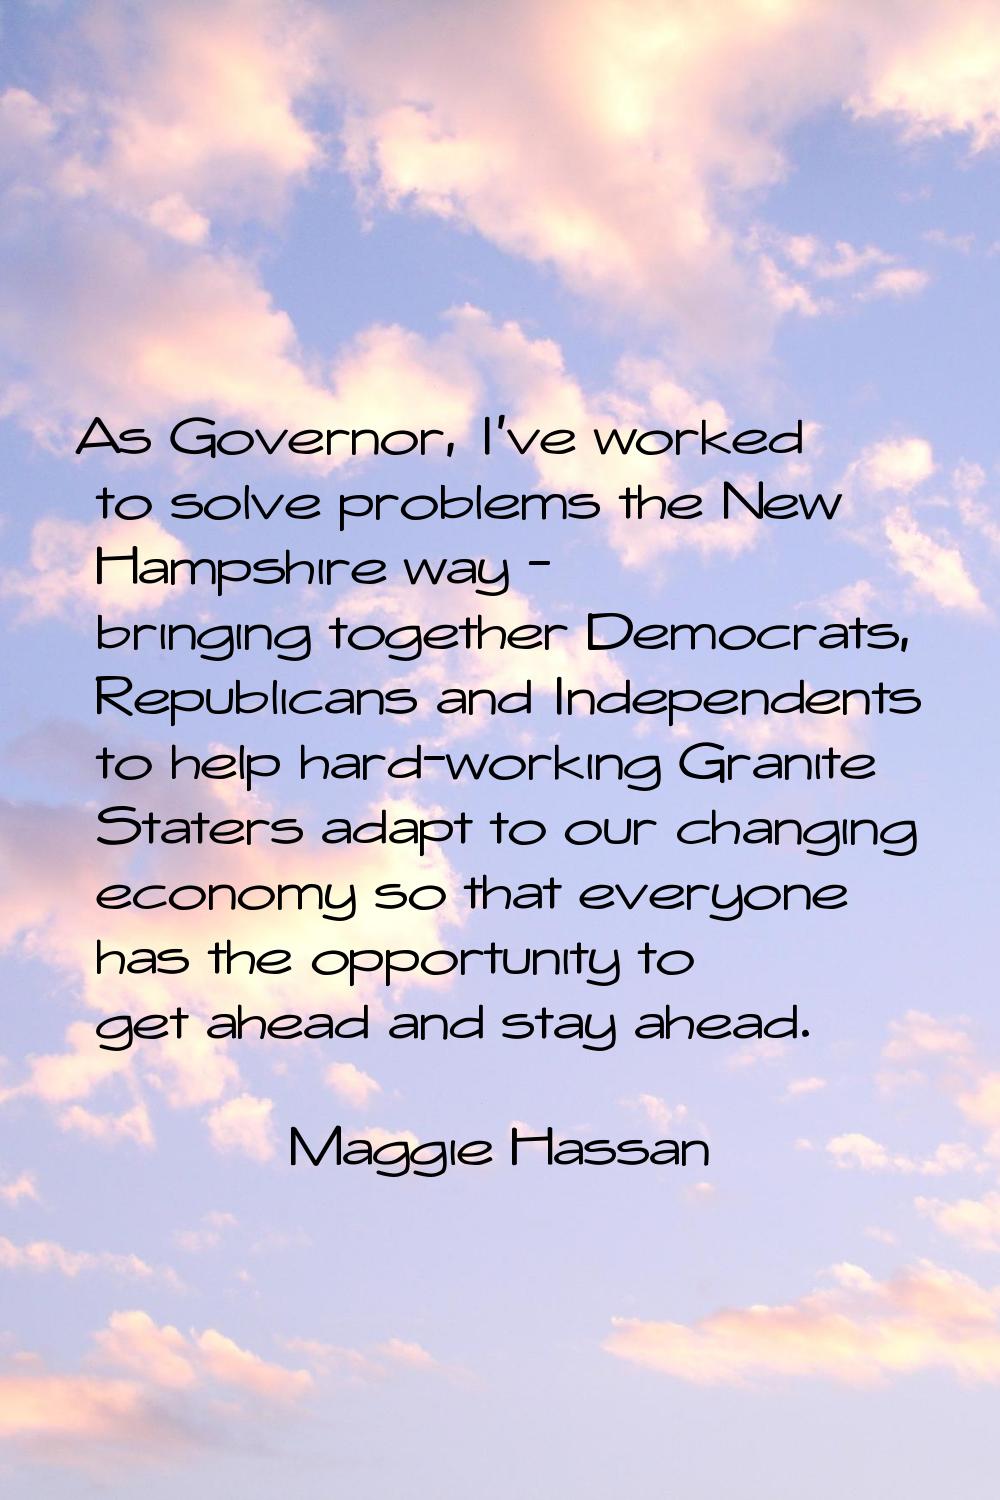 As Governor, I've worked to solve problems the New Hampshire way - bringing together Democrats, Rep